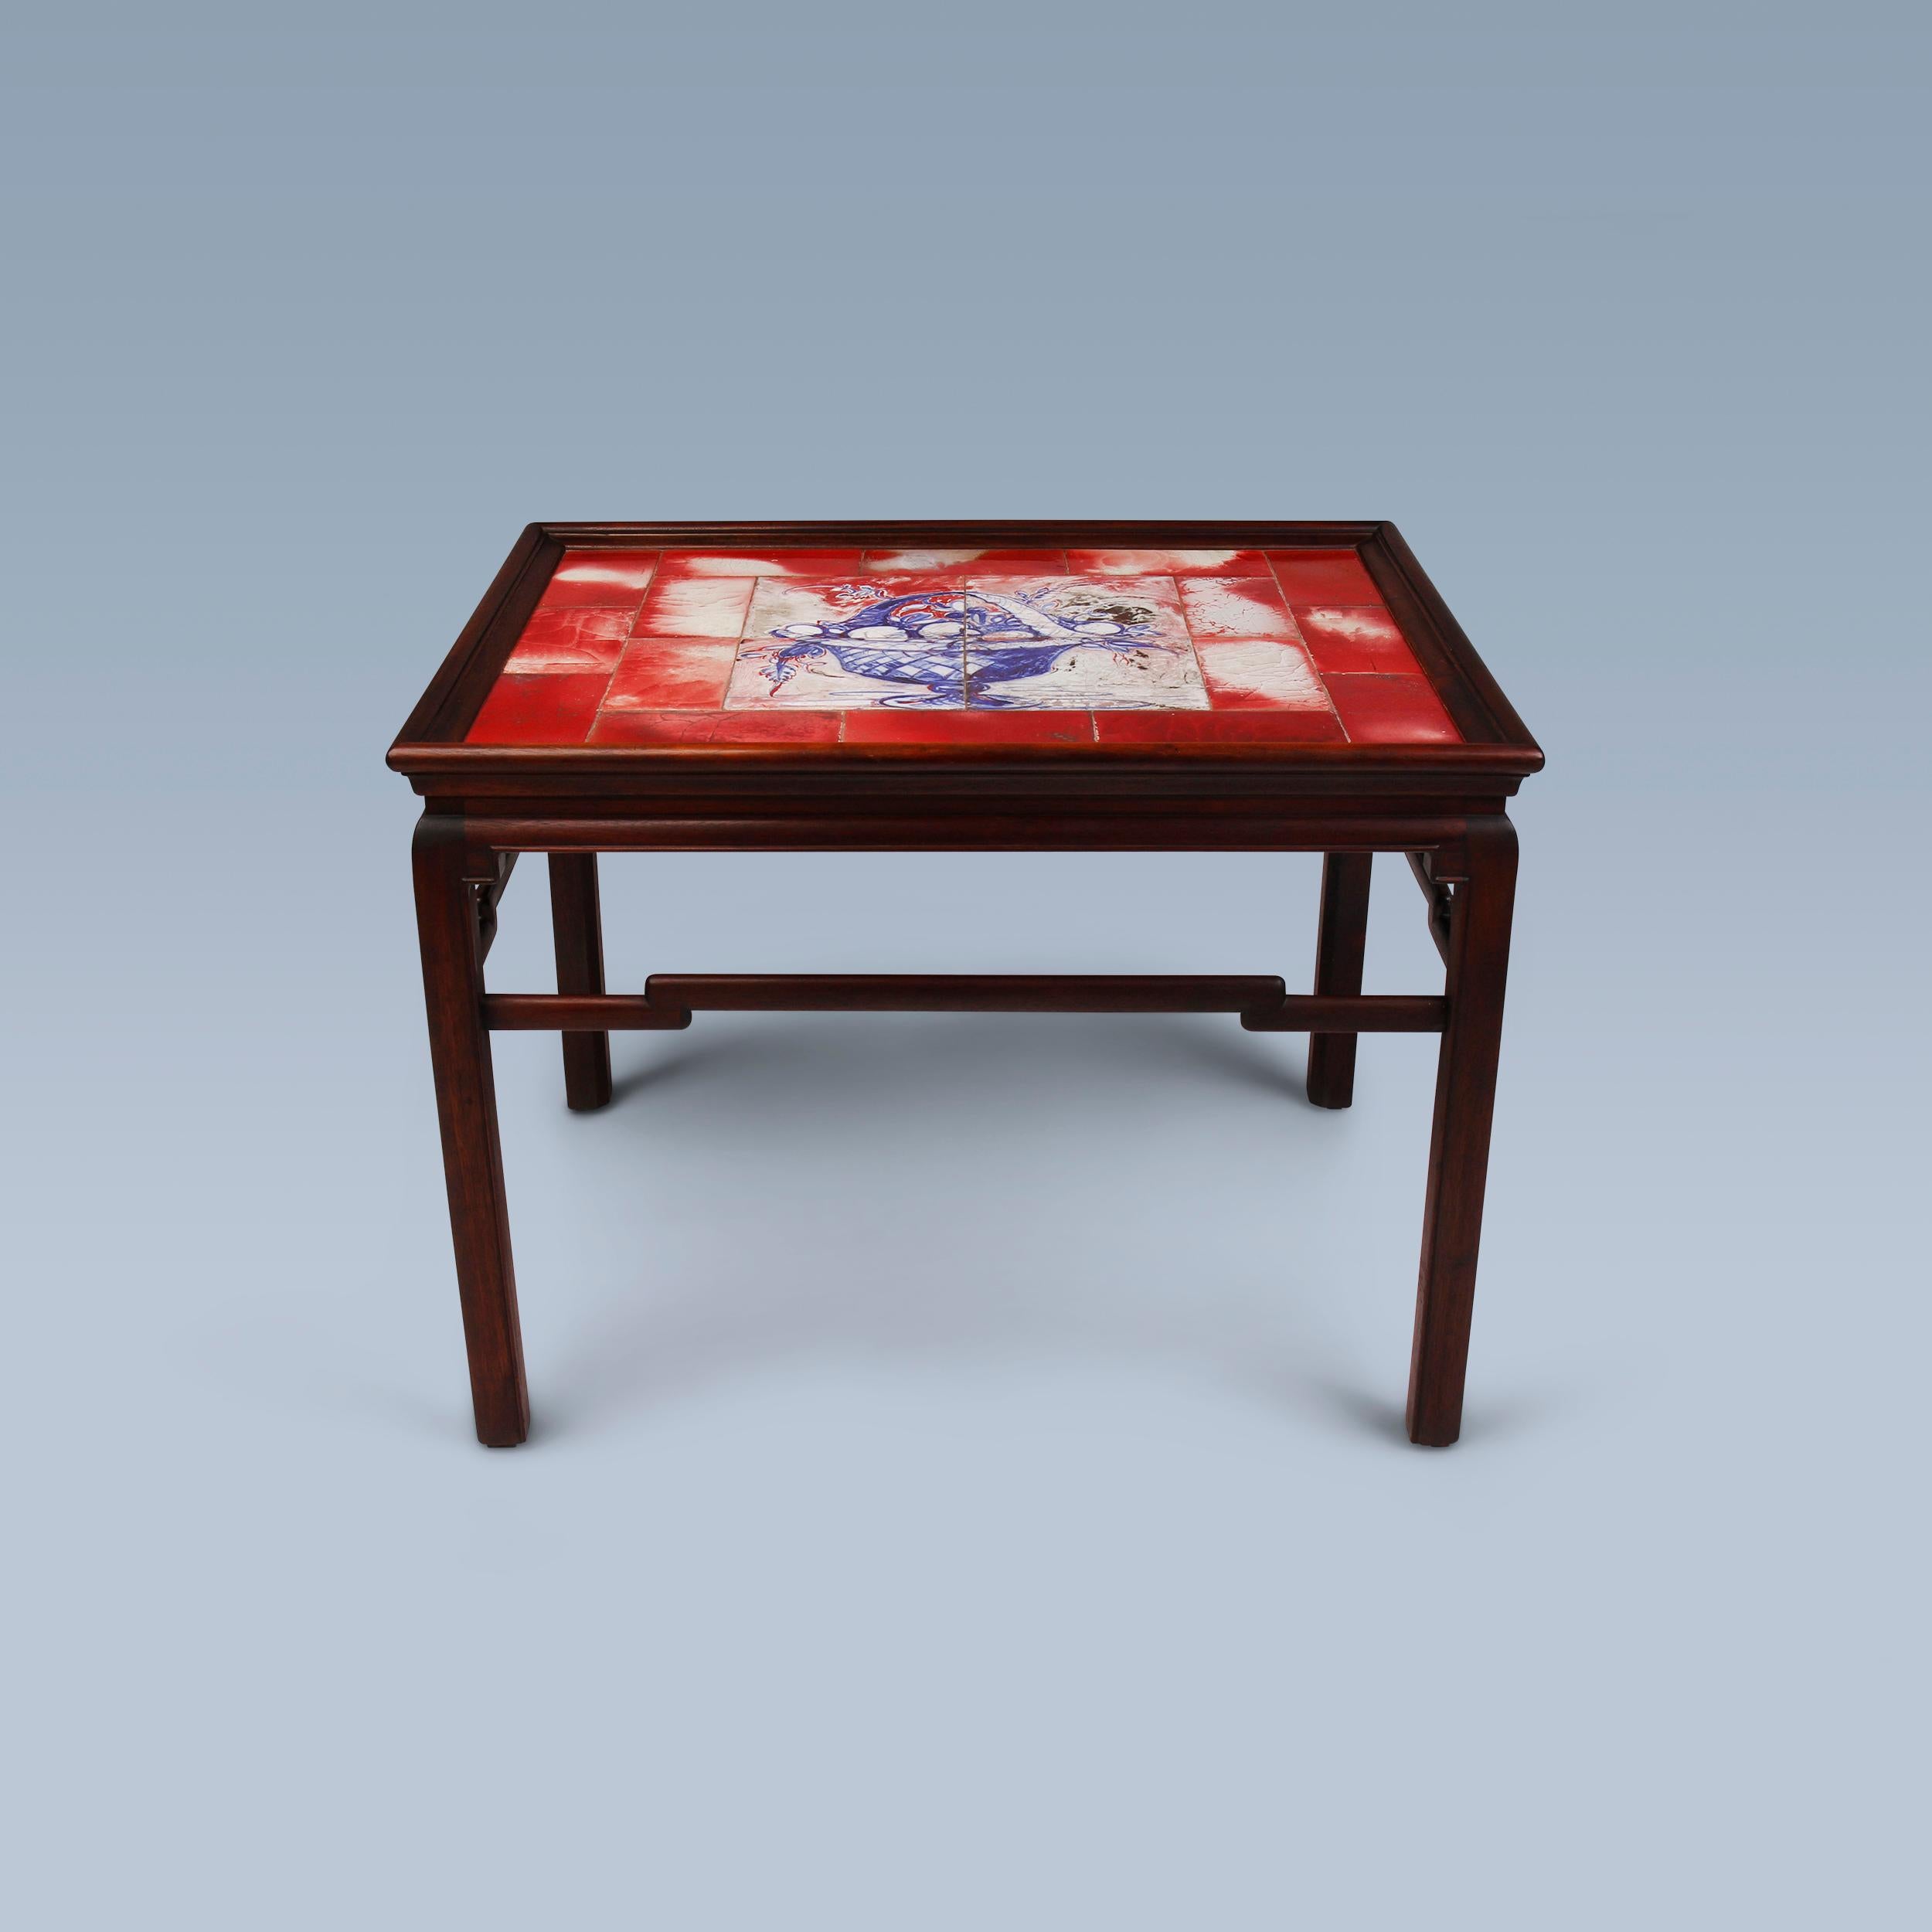 Danish Chinese inspired mahogany coffee table with tiles in red, white and blue nuances For Sale